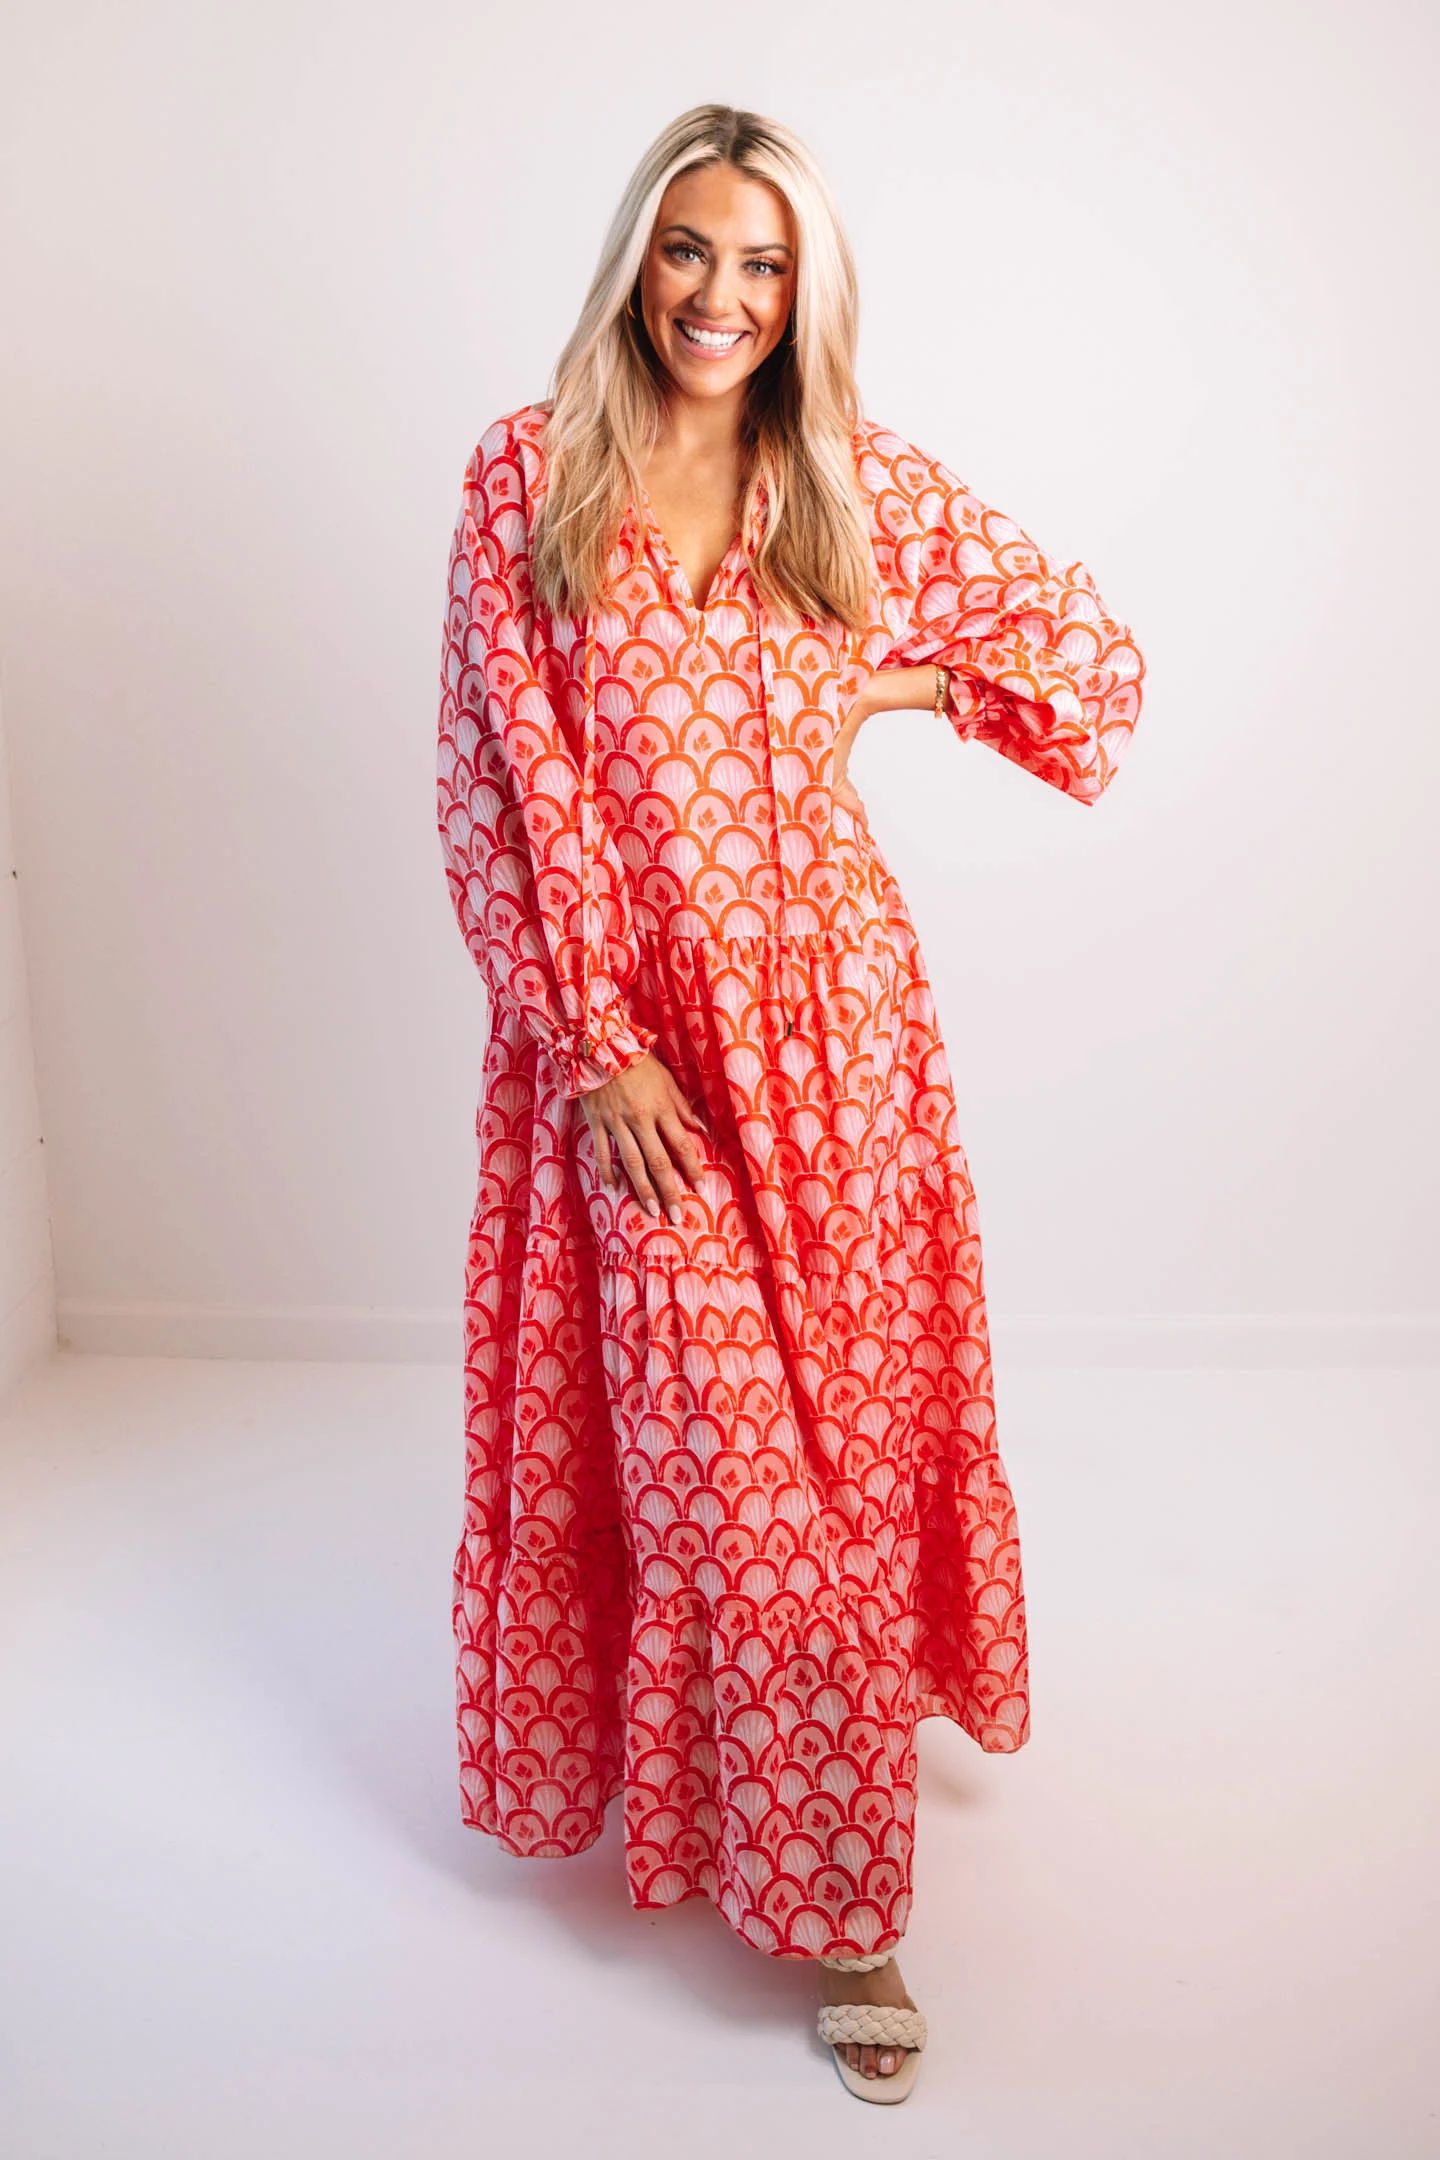 The Scarlette Long Sleeve Maxi Dress - Peach | The Impeccable Pig